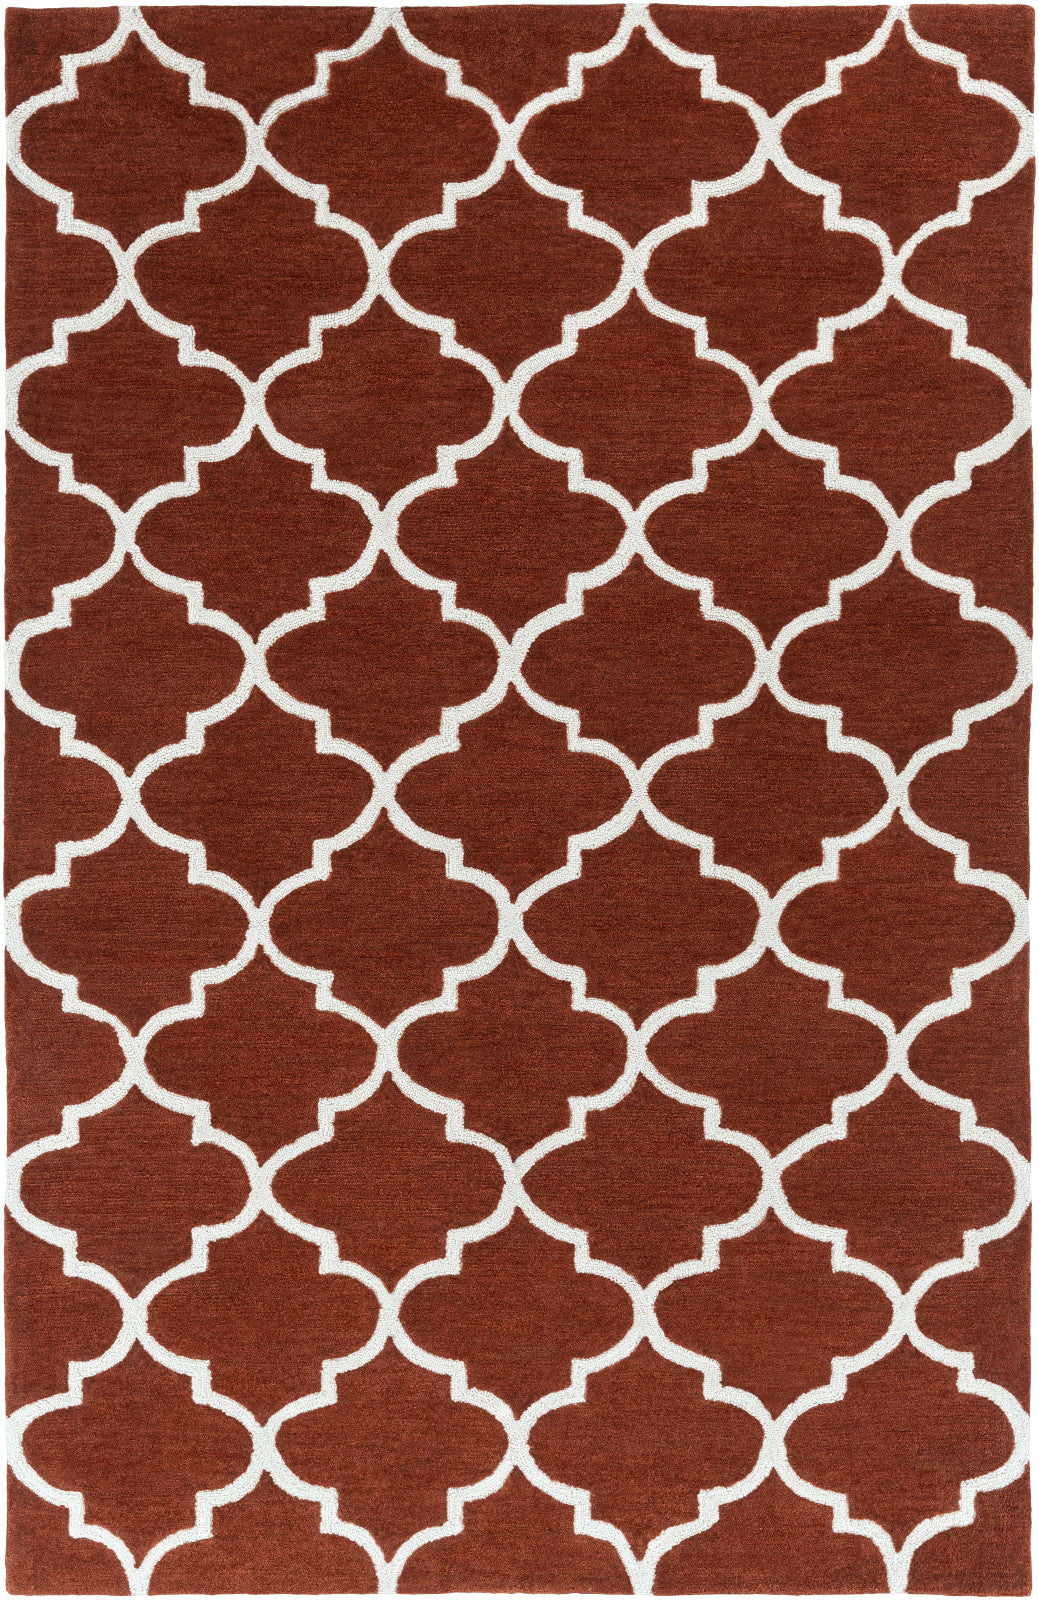 Artistic Weavers Holden Finley Rust/Ivory Area Rug main image